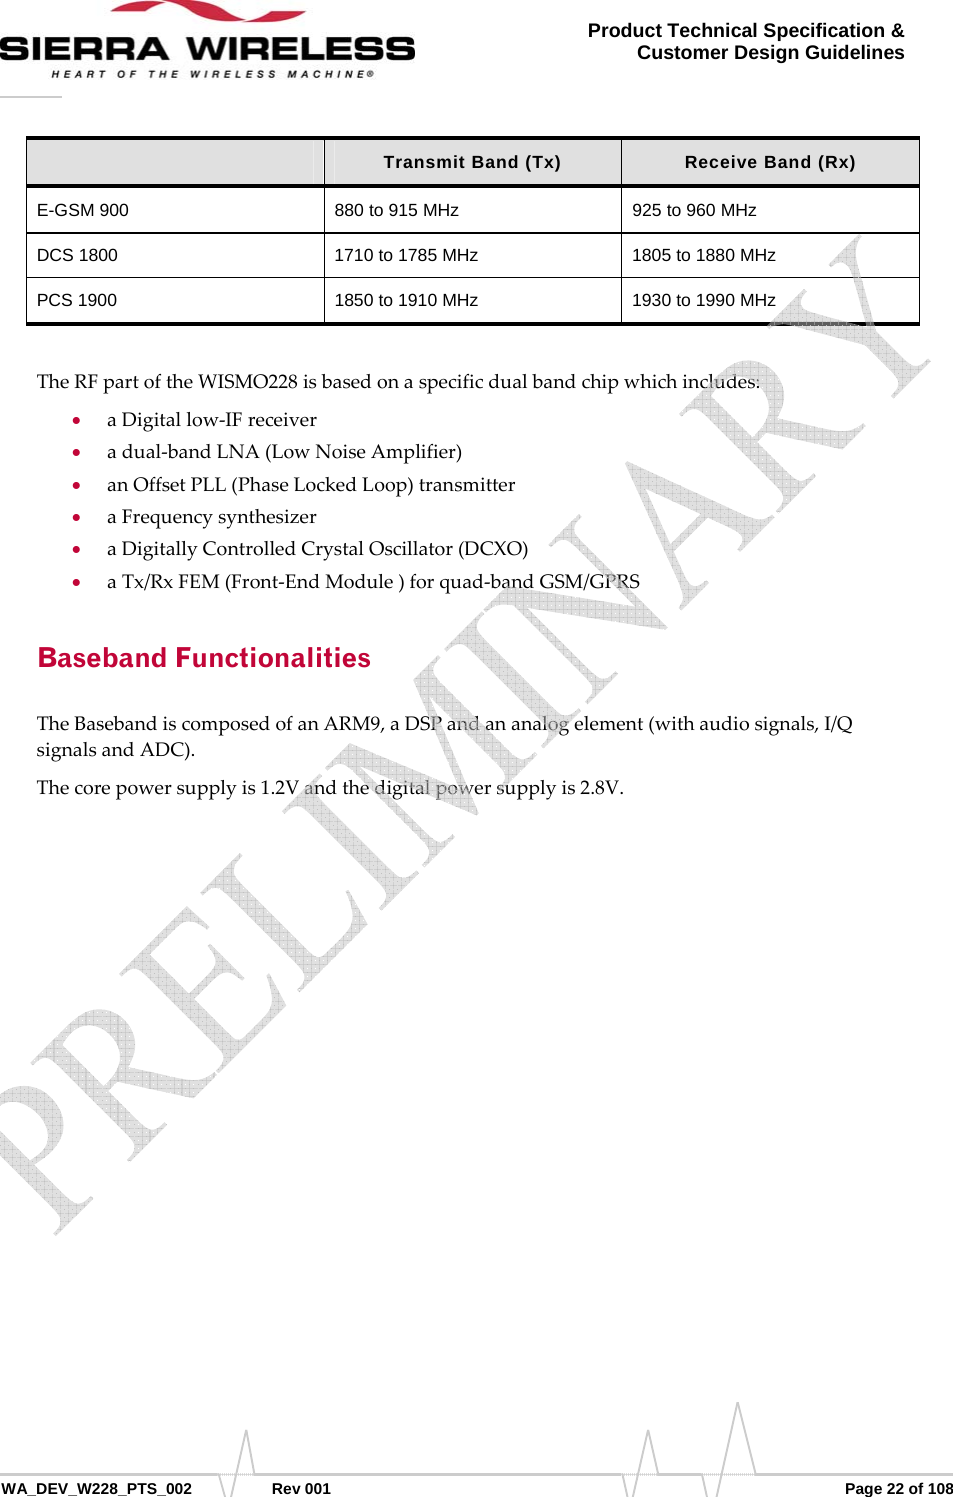      WA_DEV_W228_PTS_002 Rev 001  Page 22 of 108 Product Technical Specification &amp; Customer Design Guidelines  Transmit Band (Tx)  Receive Band (Rx) E-GSM 900  880 to 915 MHz  925 to 960 MHz DCS 1800  1710 to 1785 MHz  1805 to 1880 MHz PCS 1900  1850 to 1910 MHz  1930 to 1990 MHz  TheRFpartoftheWISMO228isbasedonaspecificdualbandchipwhichincludes:• aDigitallow‐IFreceiver• adual‐bandLNA(LowNoiseAmplifier)• anOffsetPLL(PhaseLockedLoop)transmitter• aFrequencysynthesizer• aDigitallyControlledCrystalOscillator(DCXO)• aTx/RxFEM(Front‐EndModule)forquad‐bandGSM/GPRSBaseband Functionalities TheBasebandiscomposedofanARM9,aDSPandananalogelement(withaudiosignals,I/QsignalsandADC).Thecorepowersupplyis1.2Vandthedigitalpowersupplyis2.8V.   